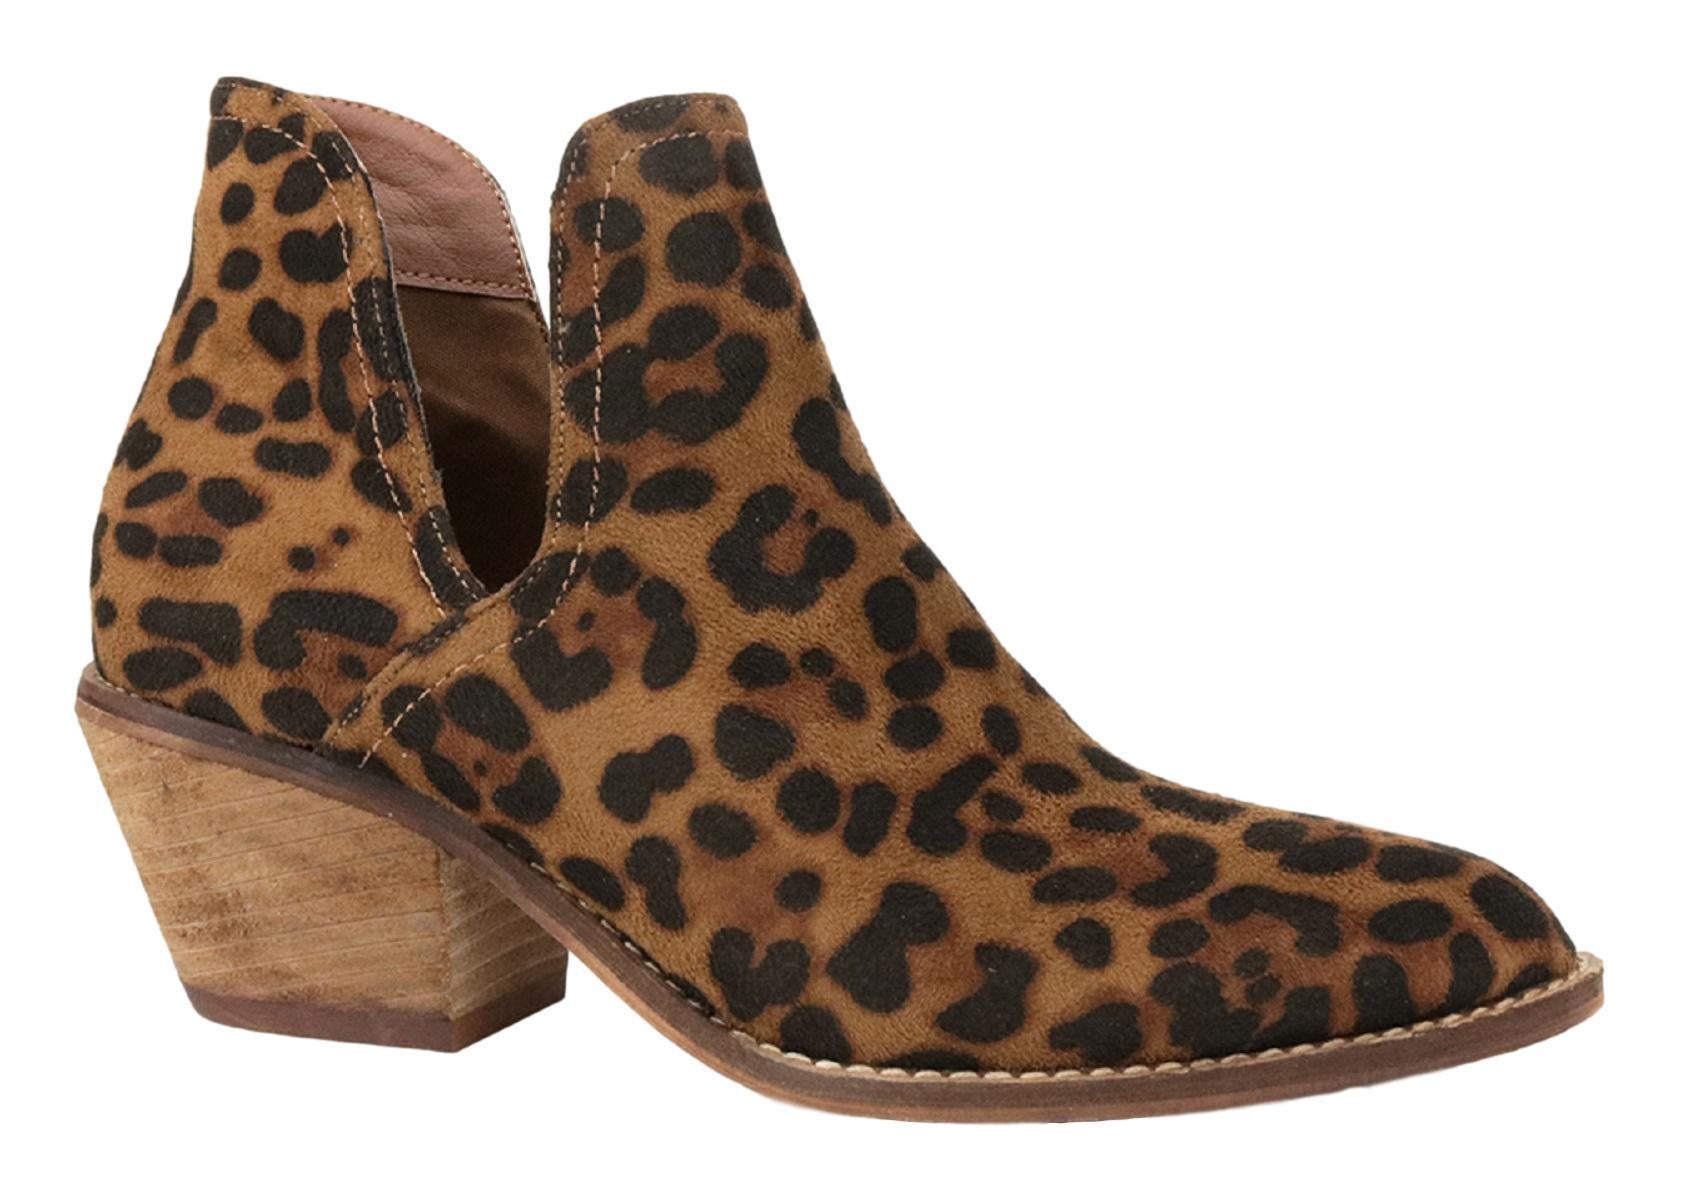 leopard pointed toe booties